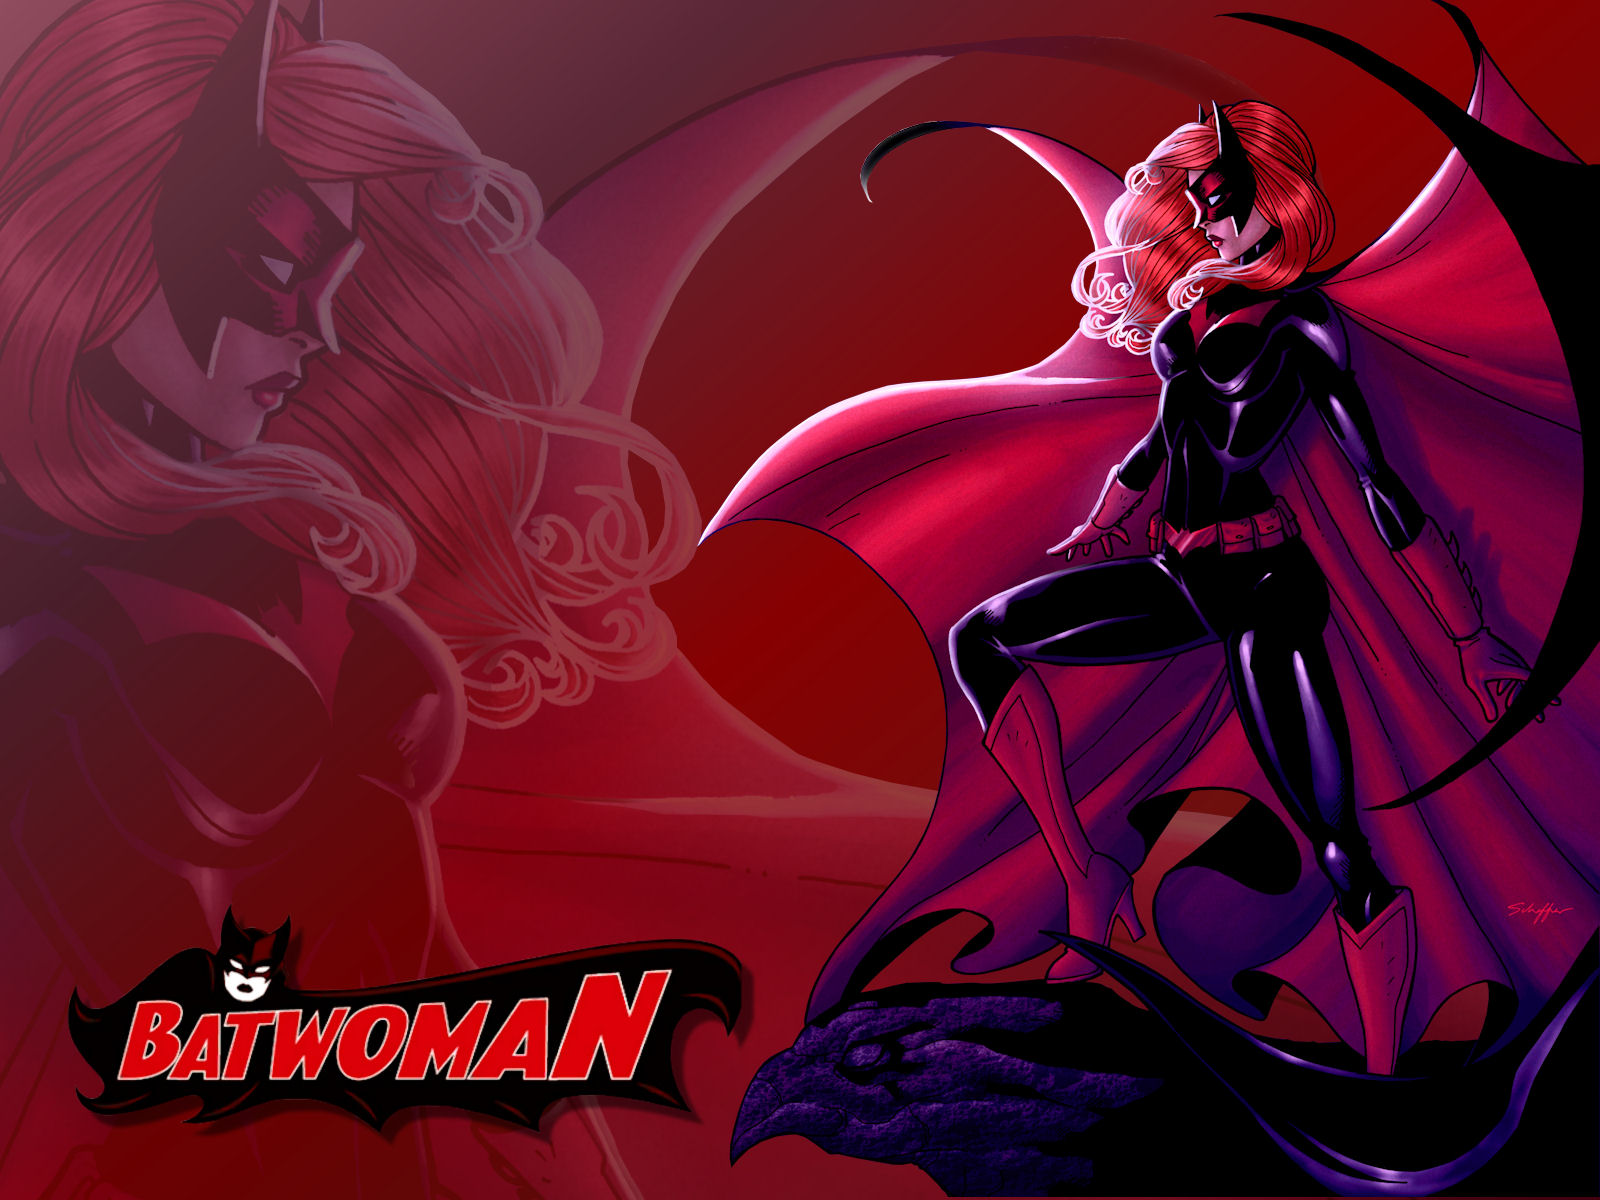 Batwoman - Gallery Colection